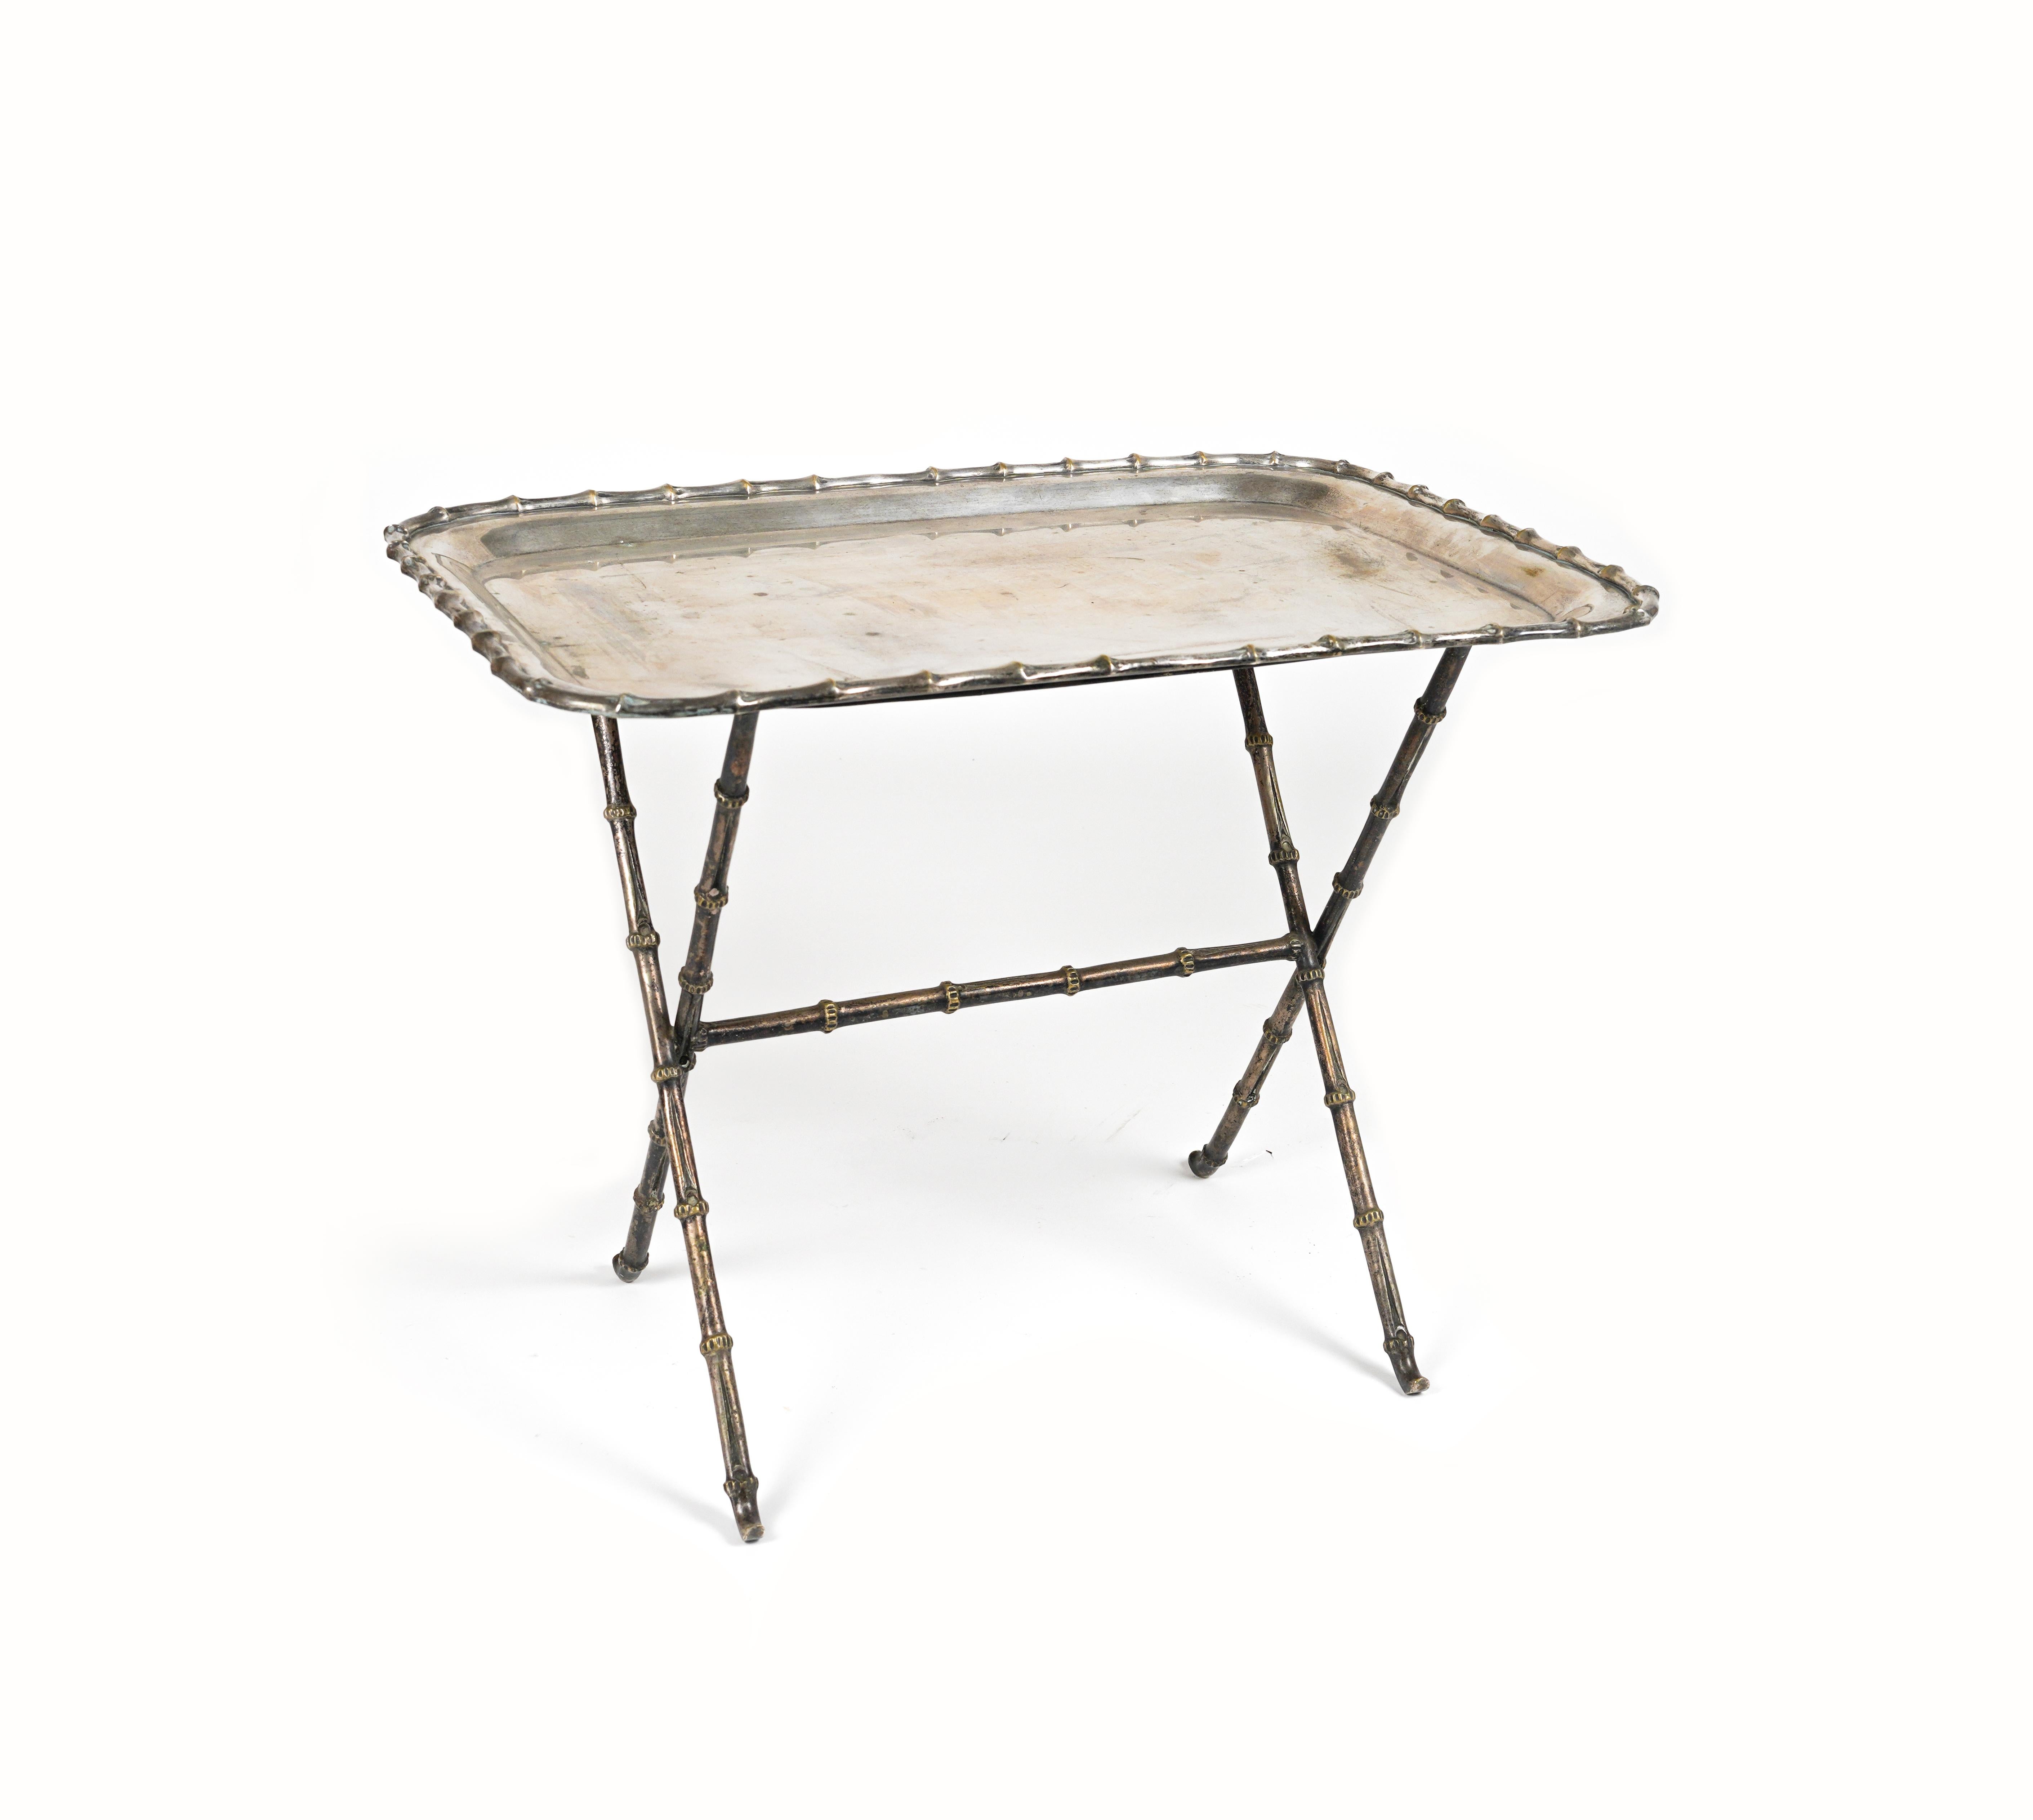 Midcentury amazing side table with tray in silvered brass (charming patina on the brass) attributed to Maison Baguès.

Made in France in the 1970s.

Maison Baguès is renowned for fine brass objects and lights since its establishment in 1860. The